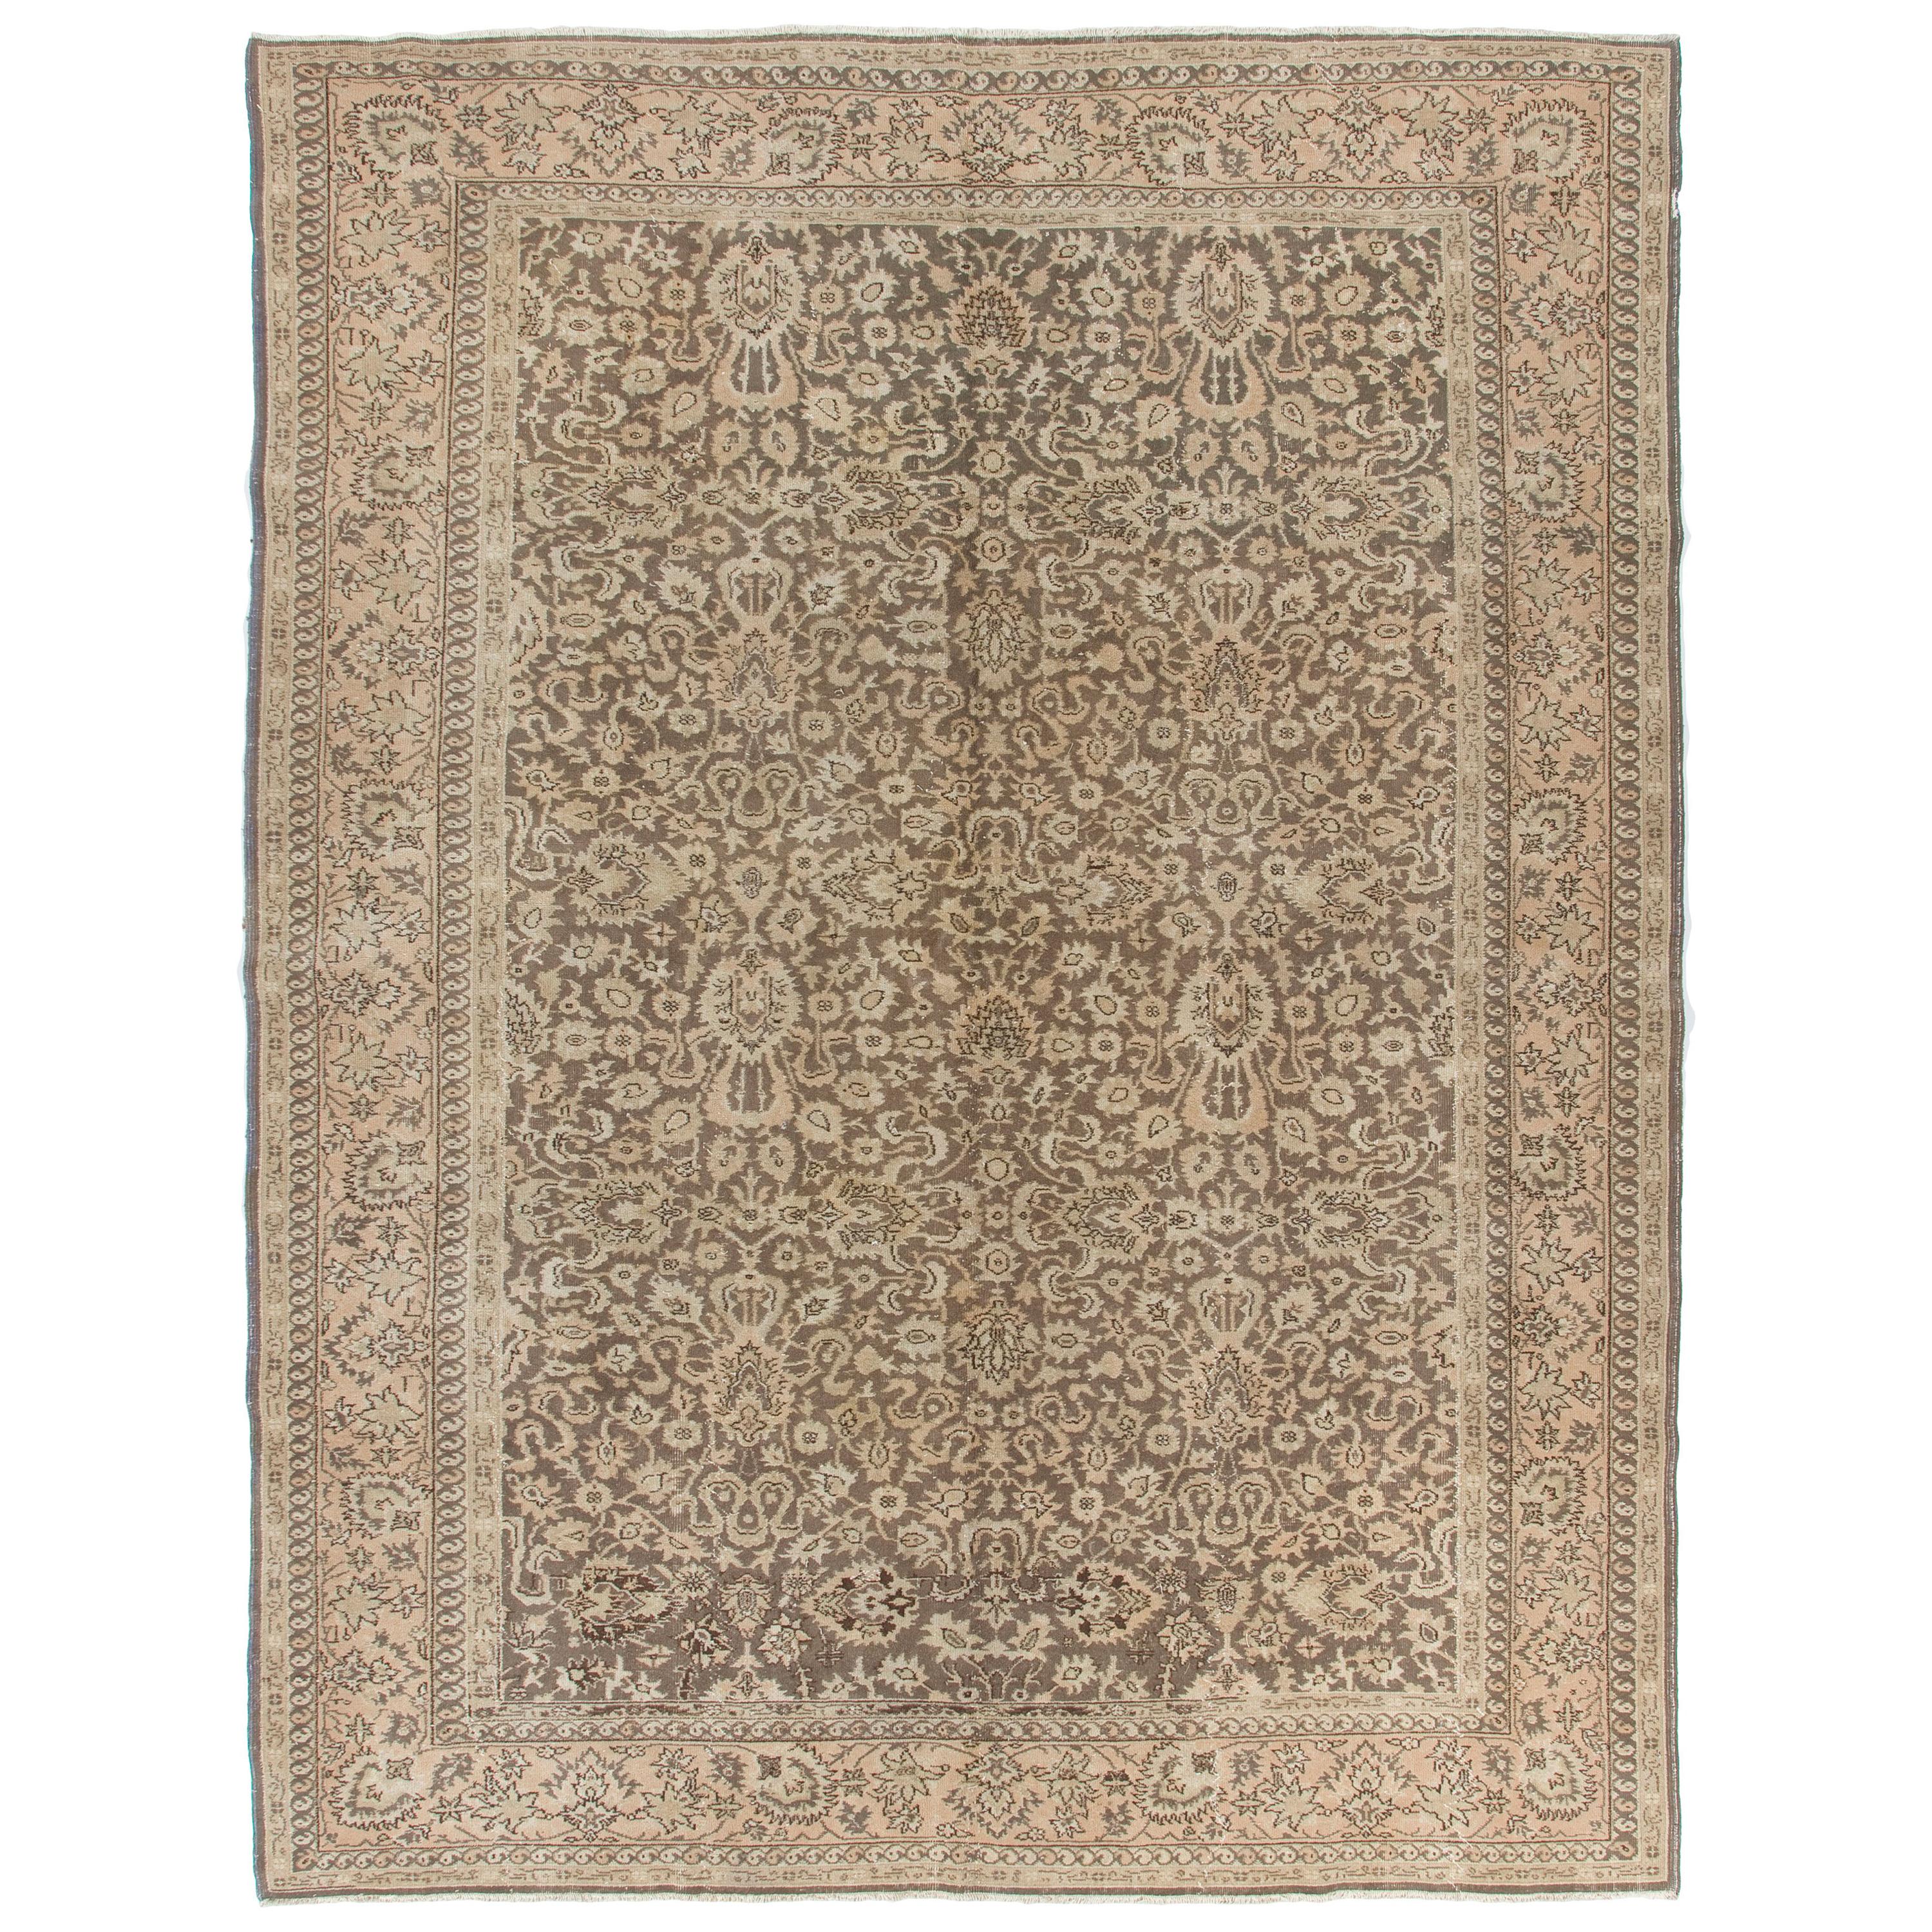 9.2x12 Ft One-of-a-Kind Turkish Sivas Rug in Soft Taupe Brown and Beige Colors